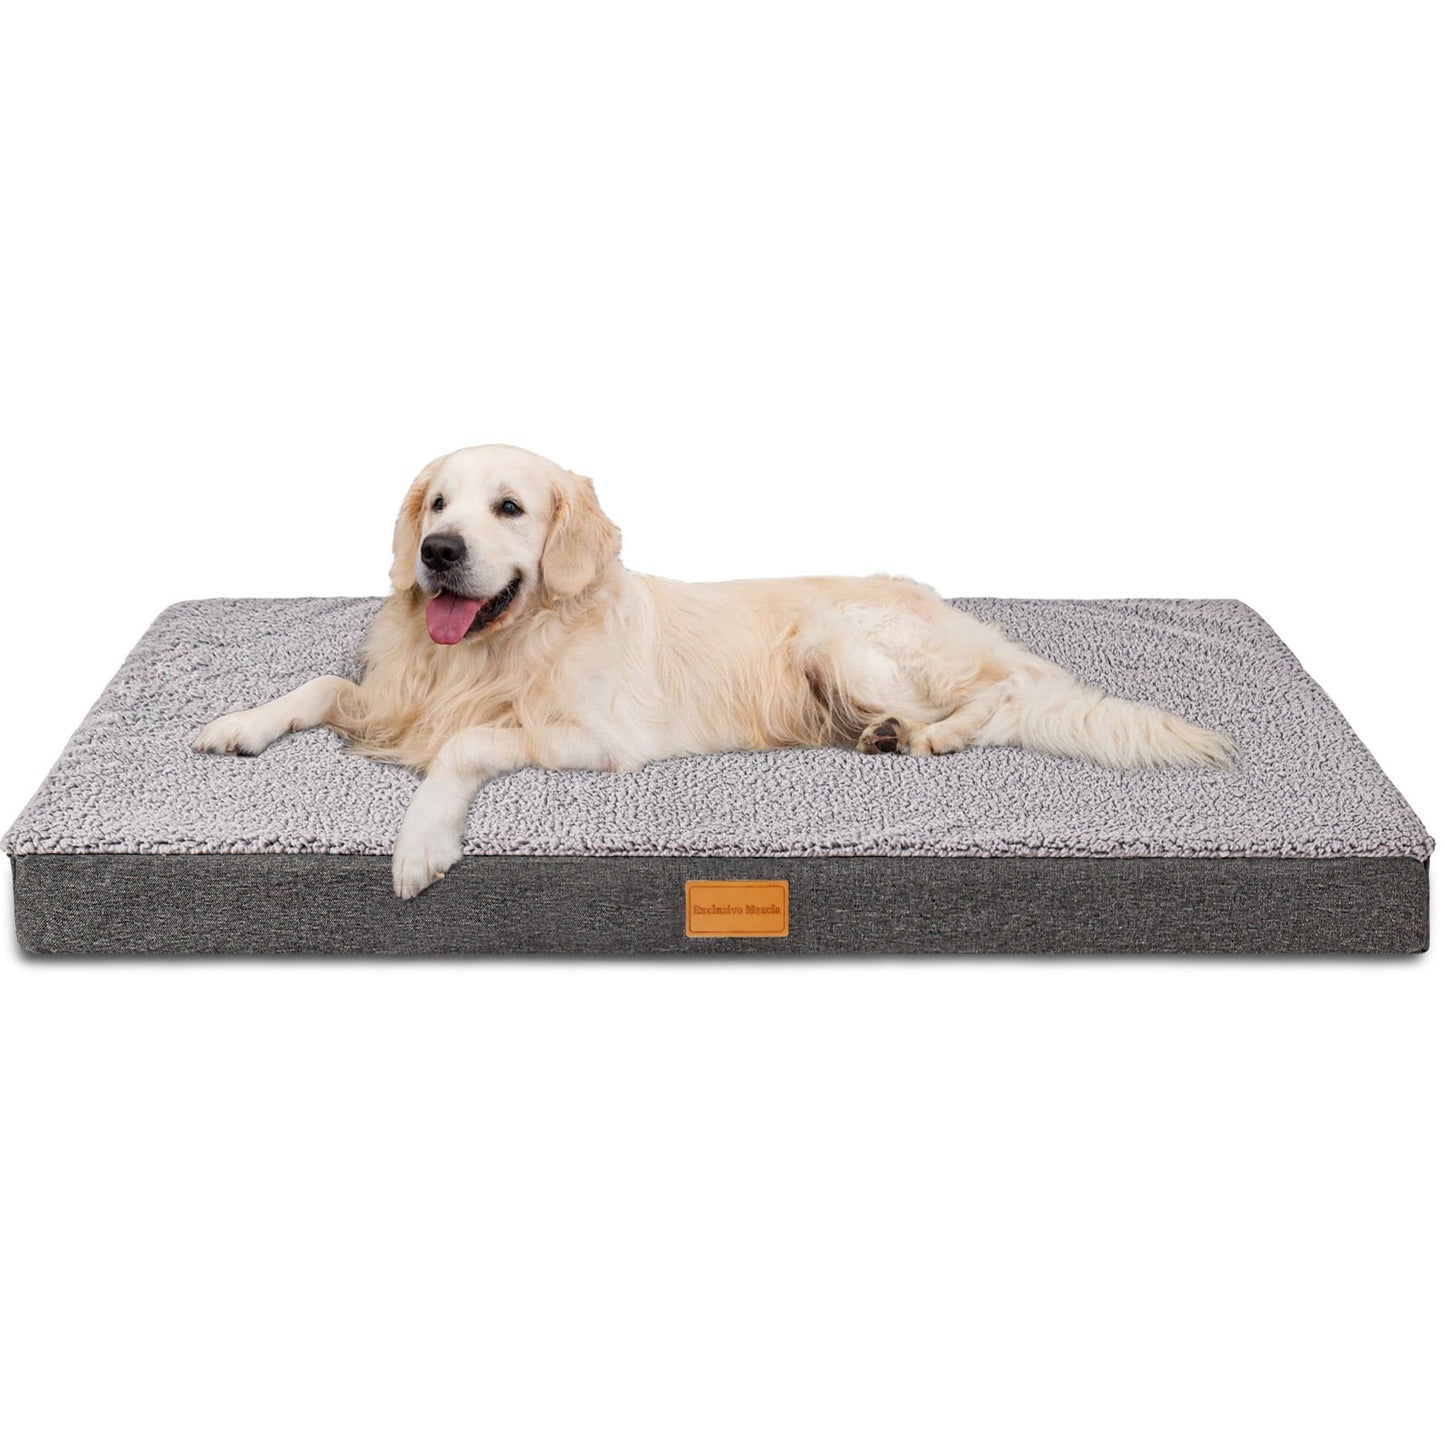 Exclusivo Mezcla Orthopedic XL Dog Bed for Large Dogs 42''X28'', Egg Crate Foam Big Large Dog Beds with Removable Washable Cover,Waterproof Pet Bed Mat, Grey